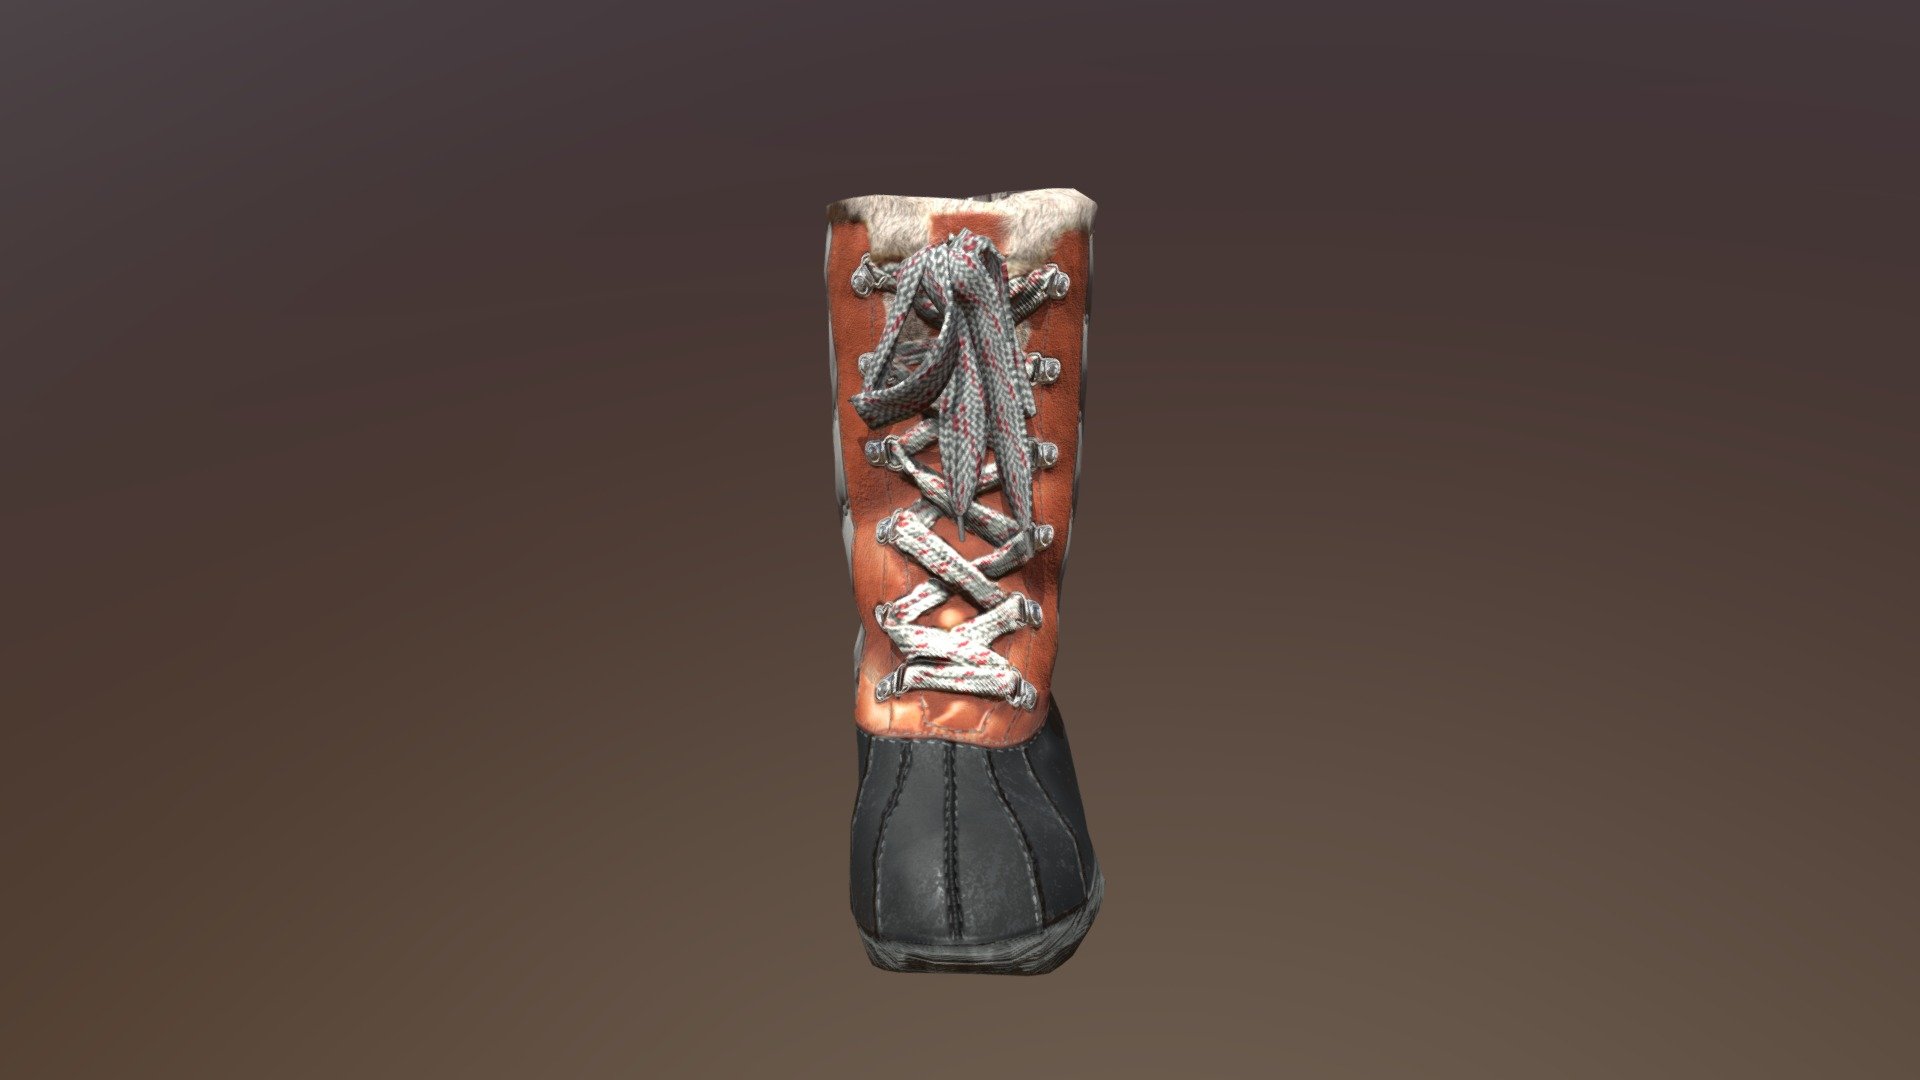 Snow Boot for CC3&amp;iClone
https://marketplace.reallusion.com/snow-boots - Snow Boot for CC3&iClone - 3D model by DorothyJeanThompson 3d model